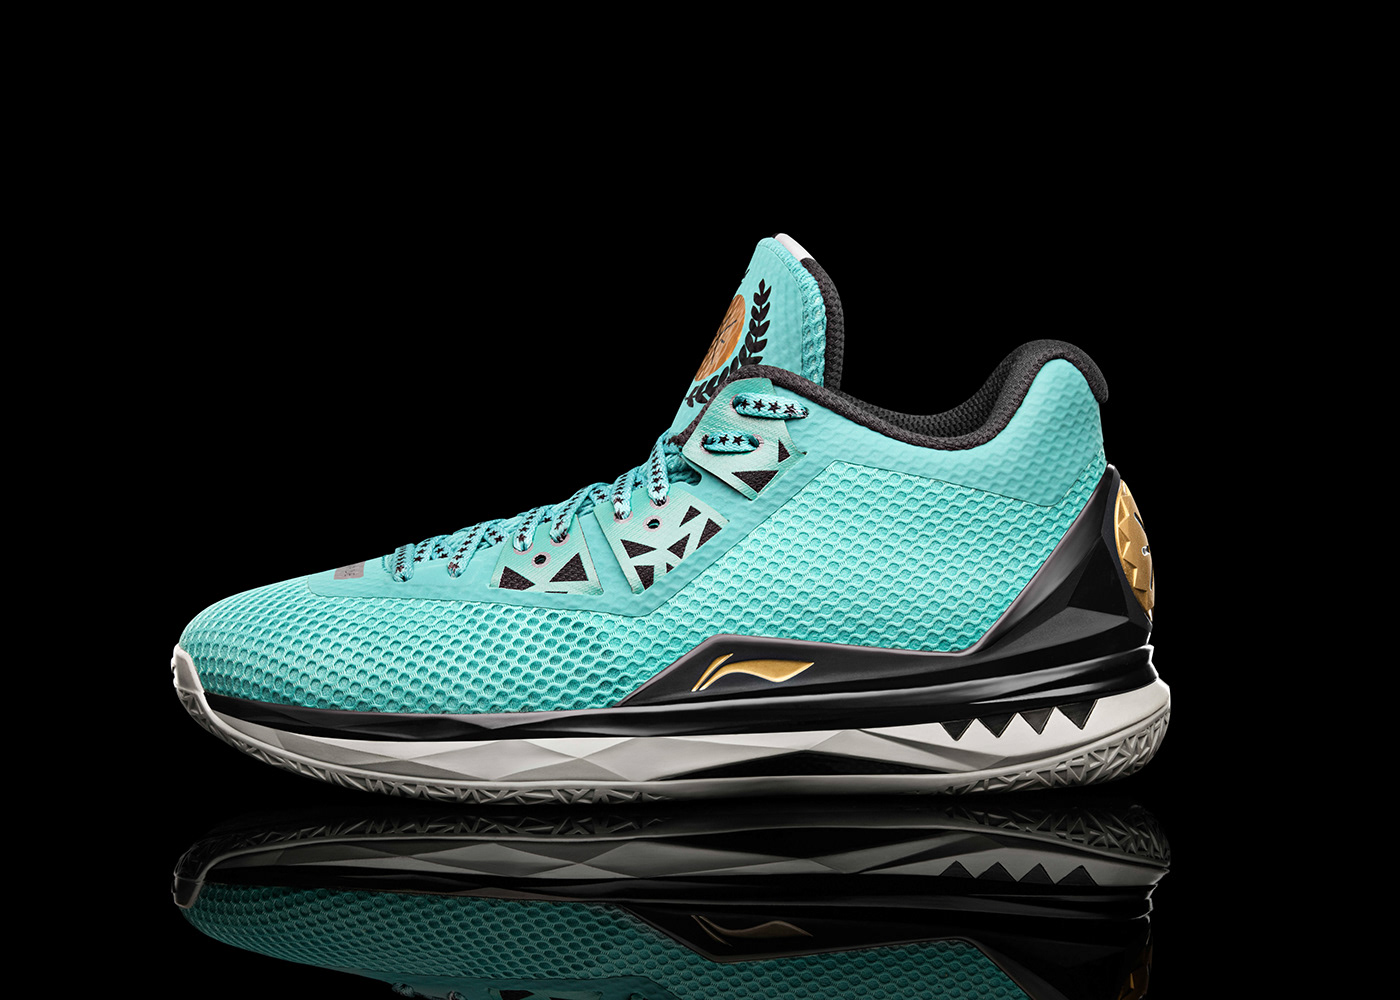 Way of Wade 4 - Product Photography on Behance